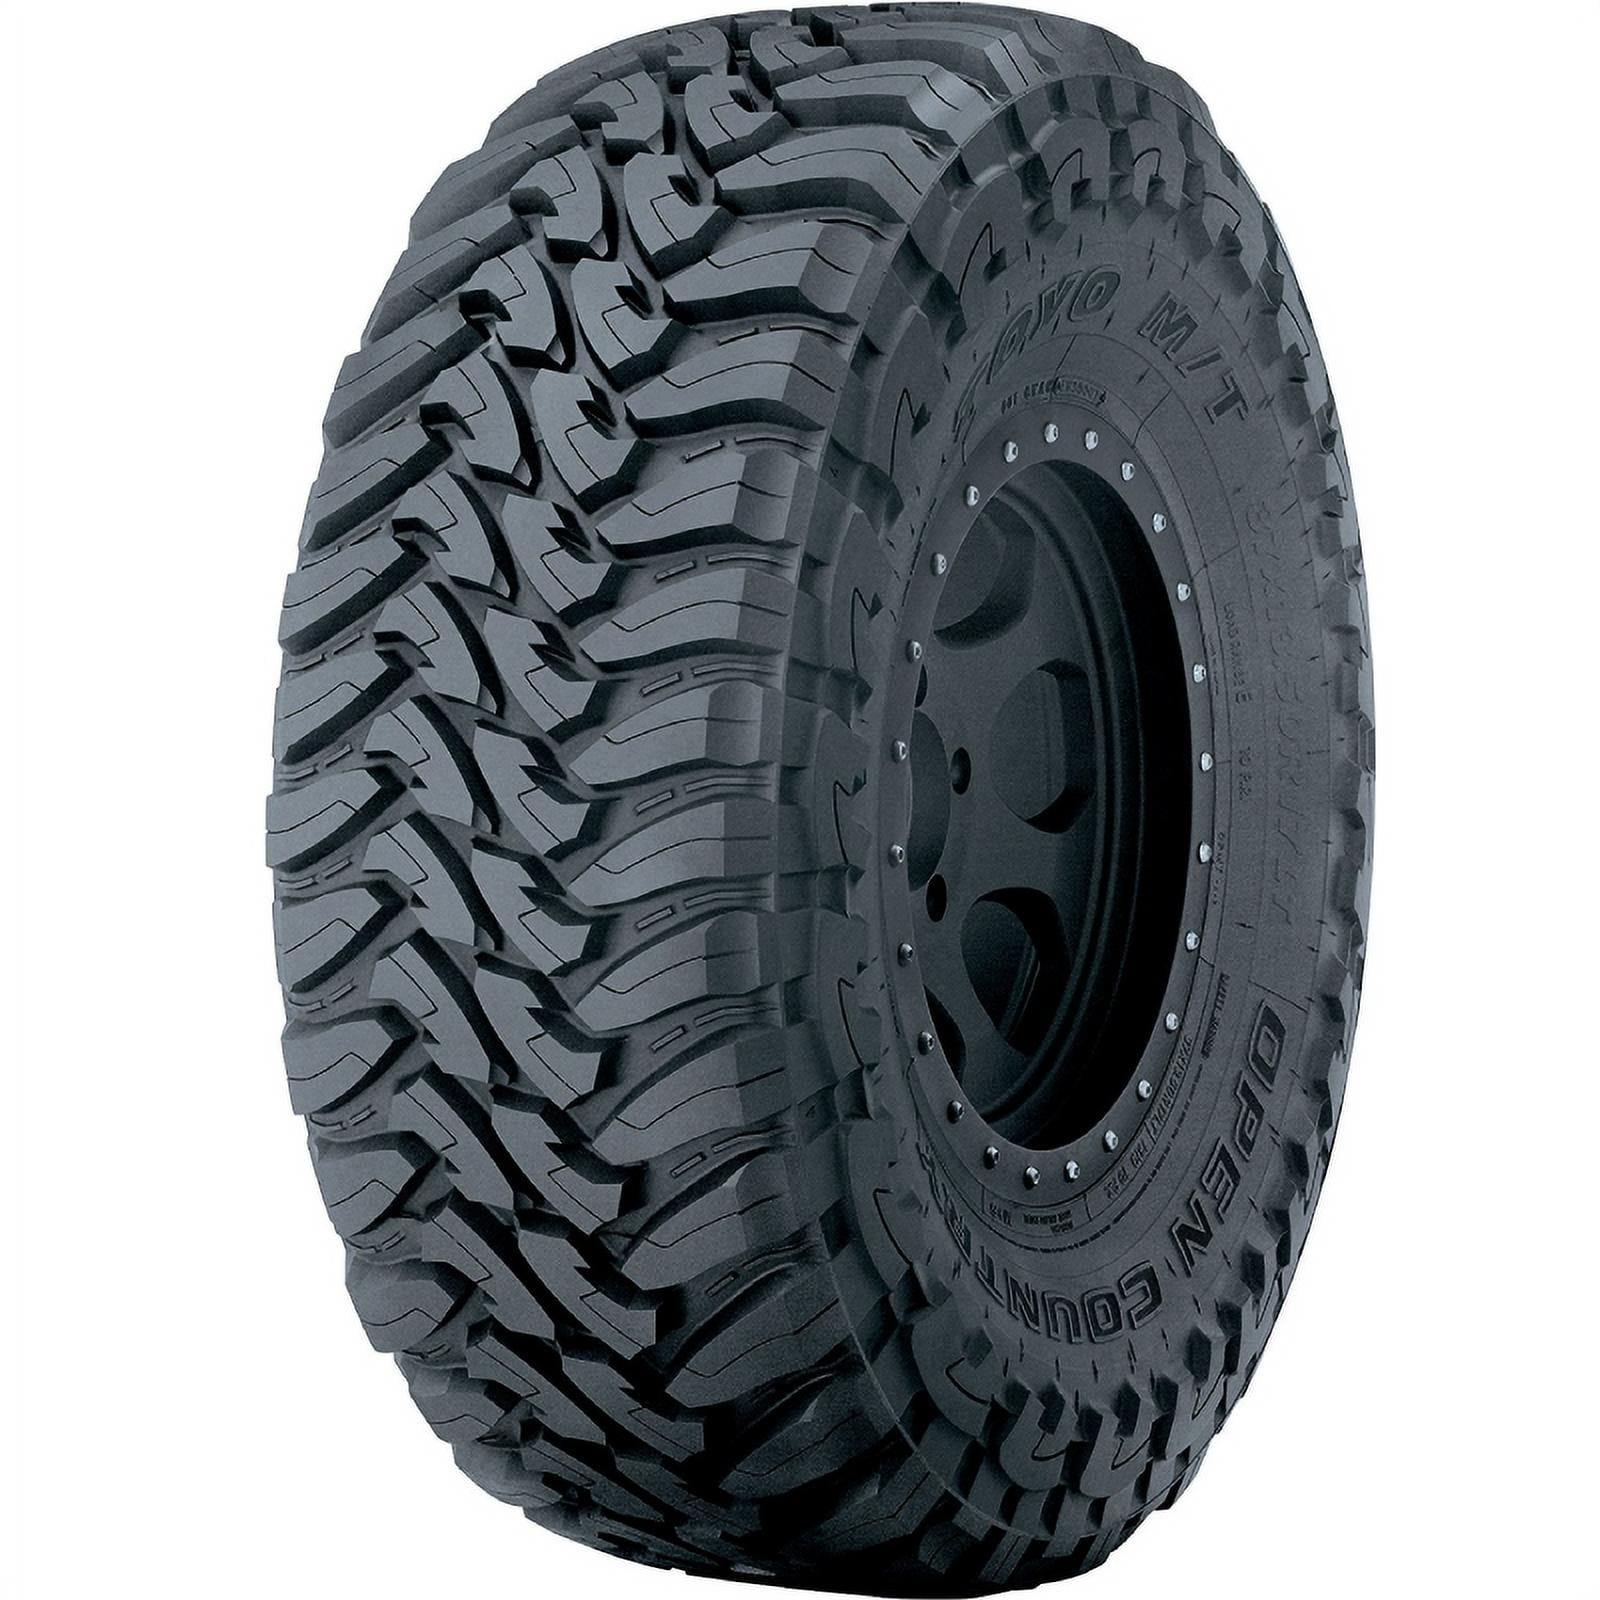 Toyo Open Country M/T Tire - 33x12.50R20LT 119Q f/12